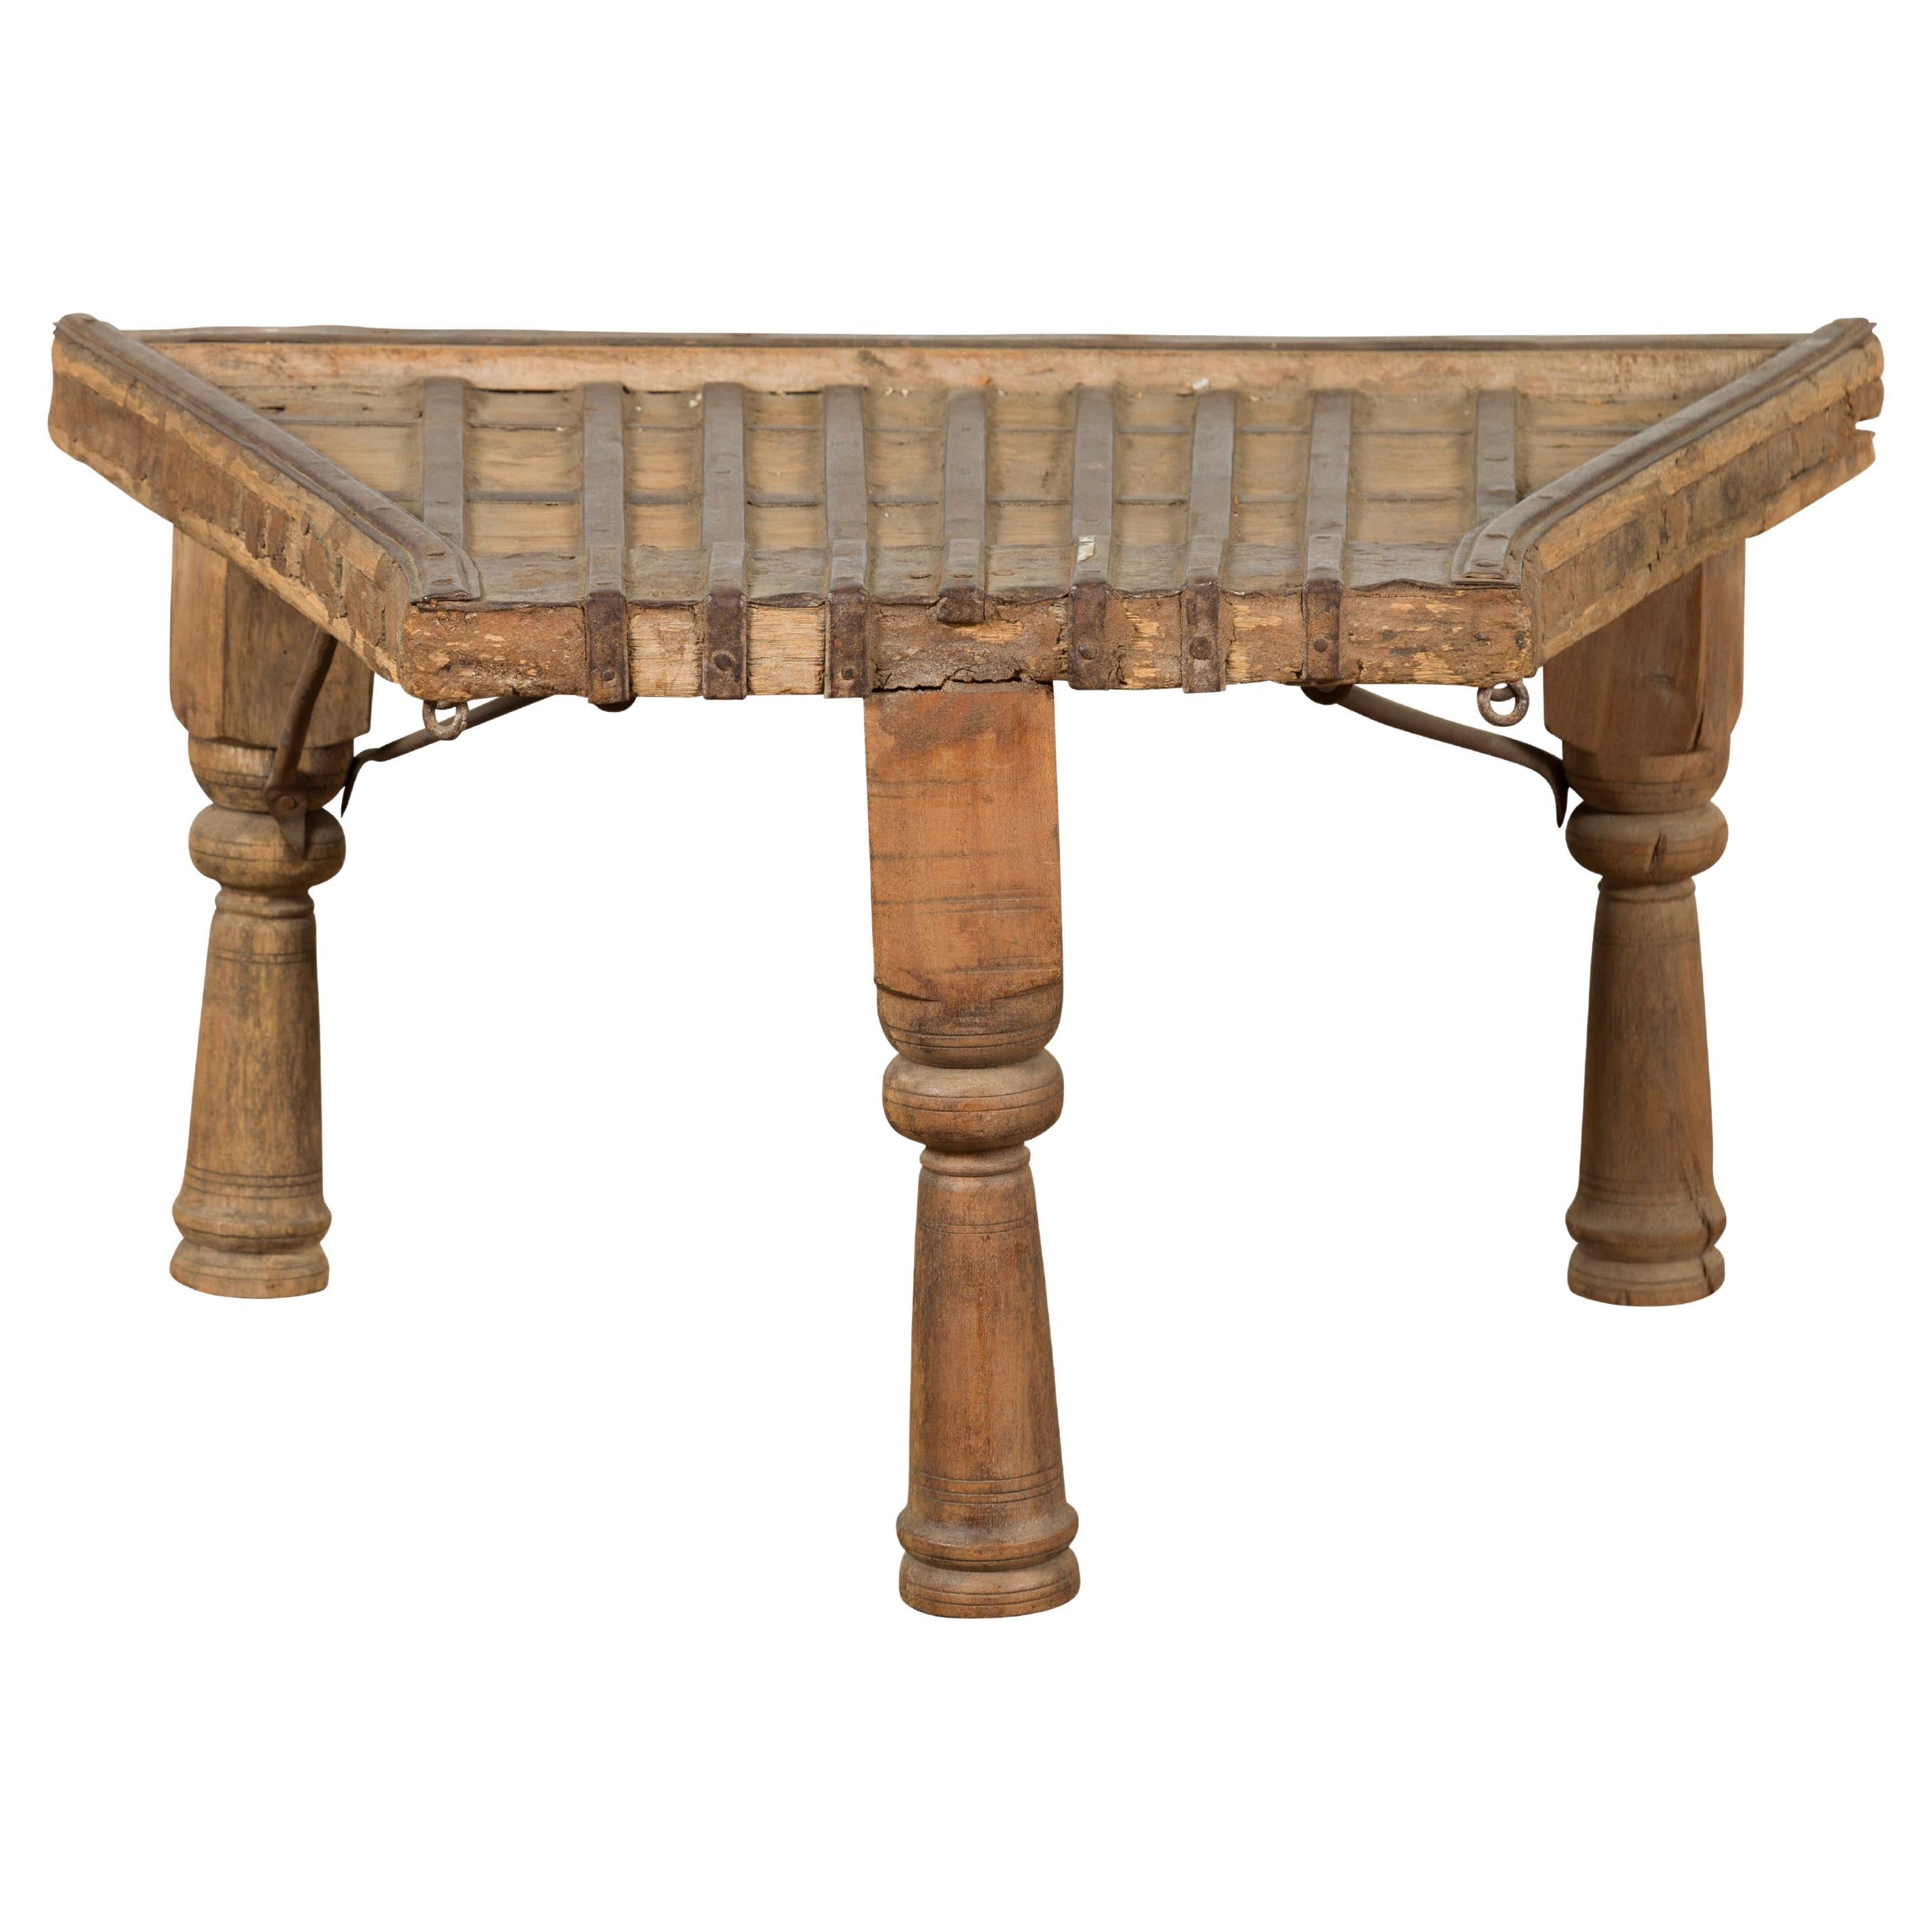 Indian 19th Century Wood Bullock Cart Made into a Coffee Table with Iron Details For Sale